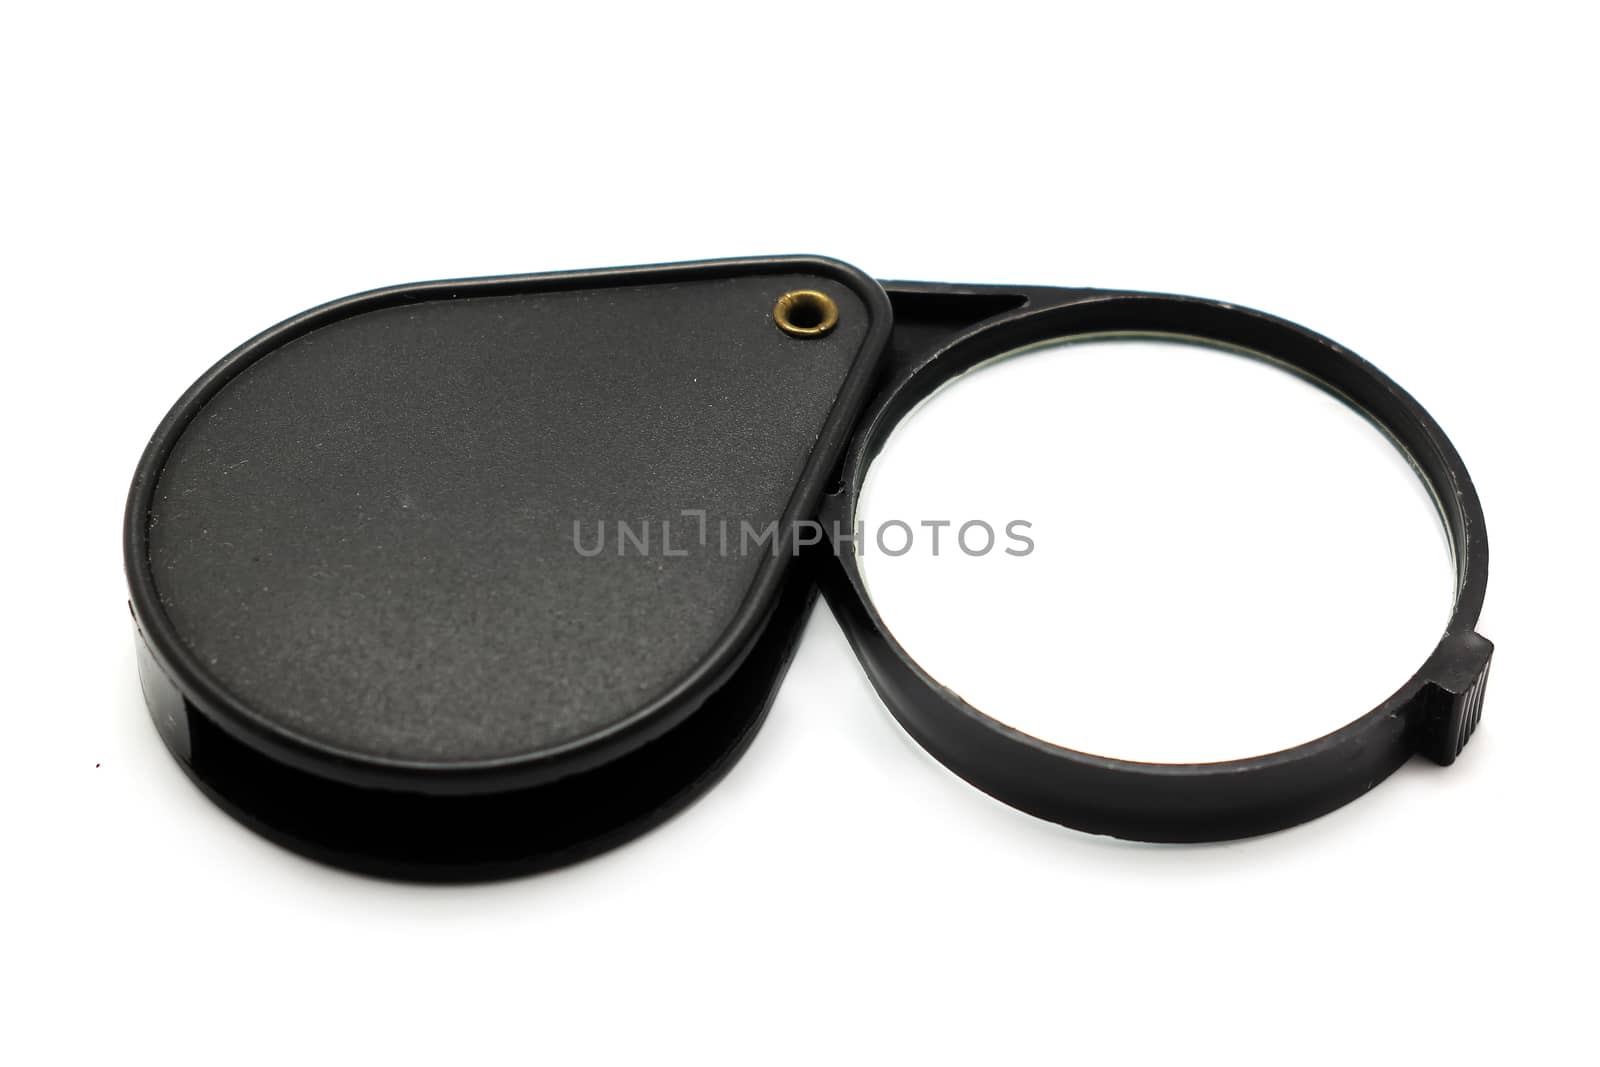 magnifying glass isolated on white by leisuretime70